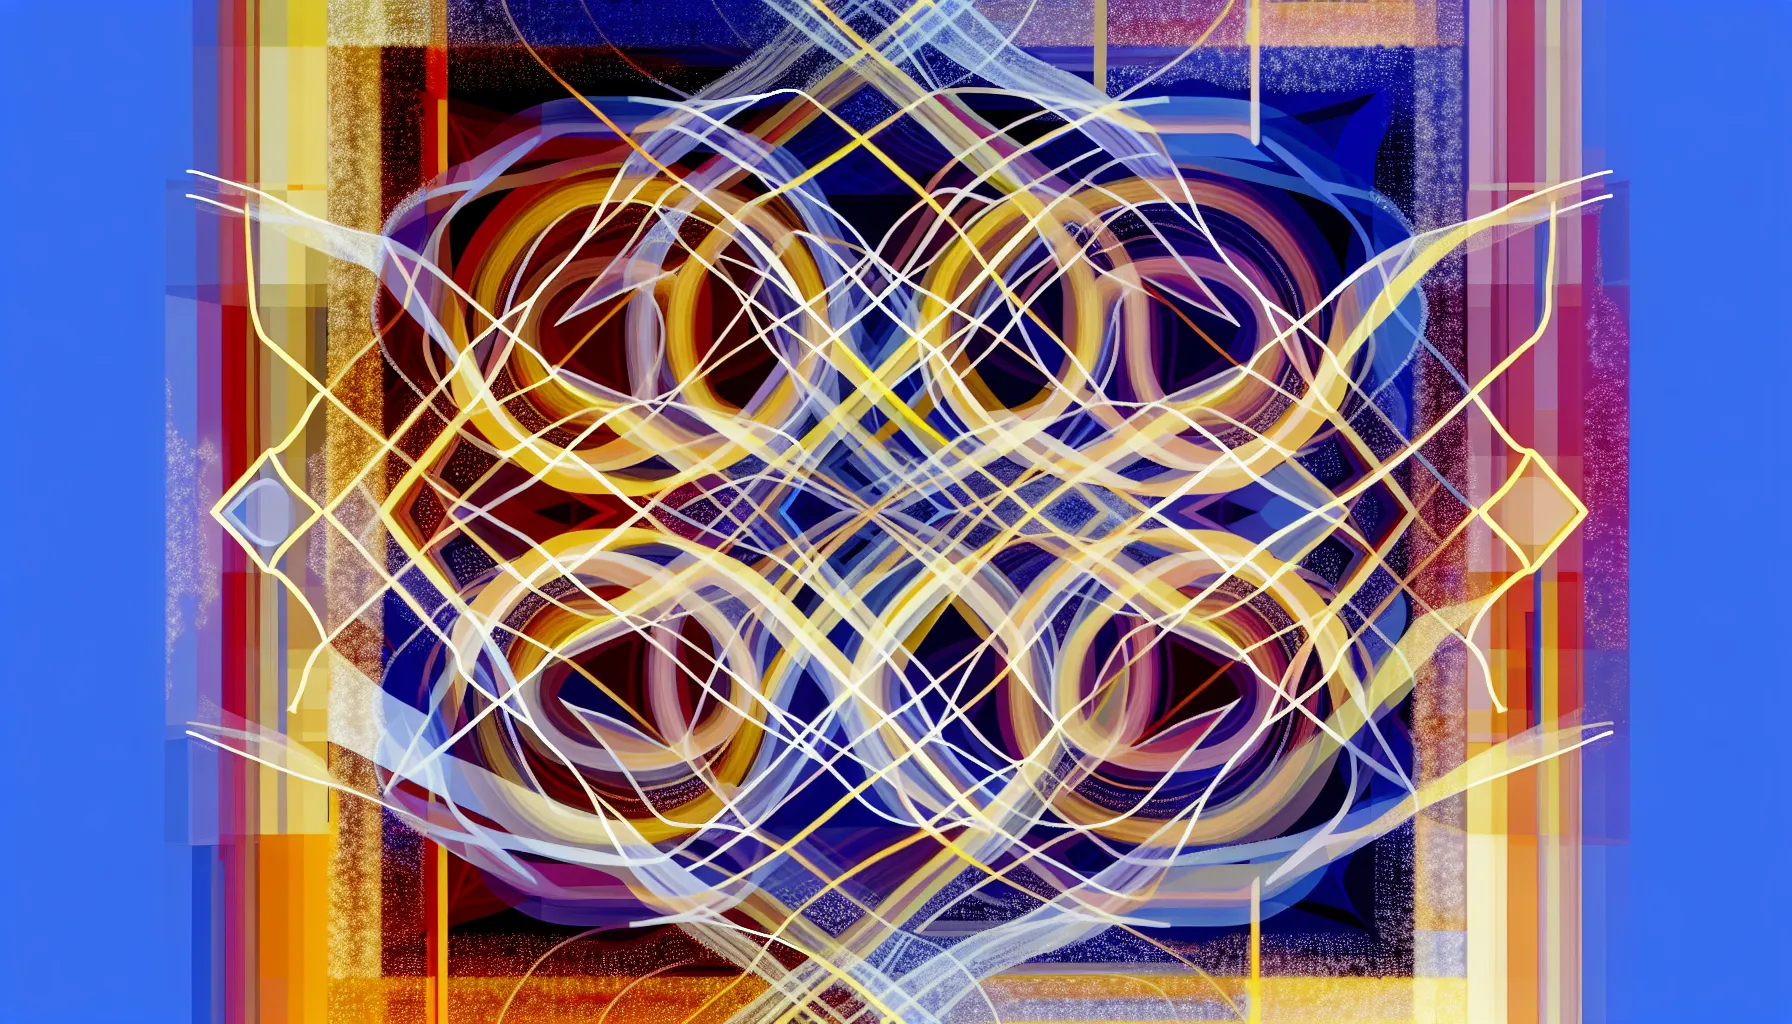 Abstract image of intertwining relationships